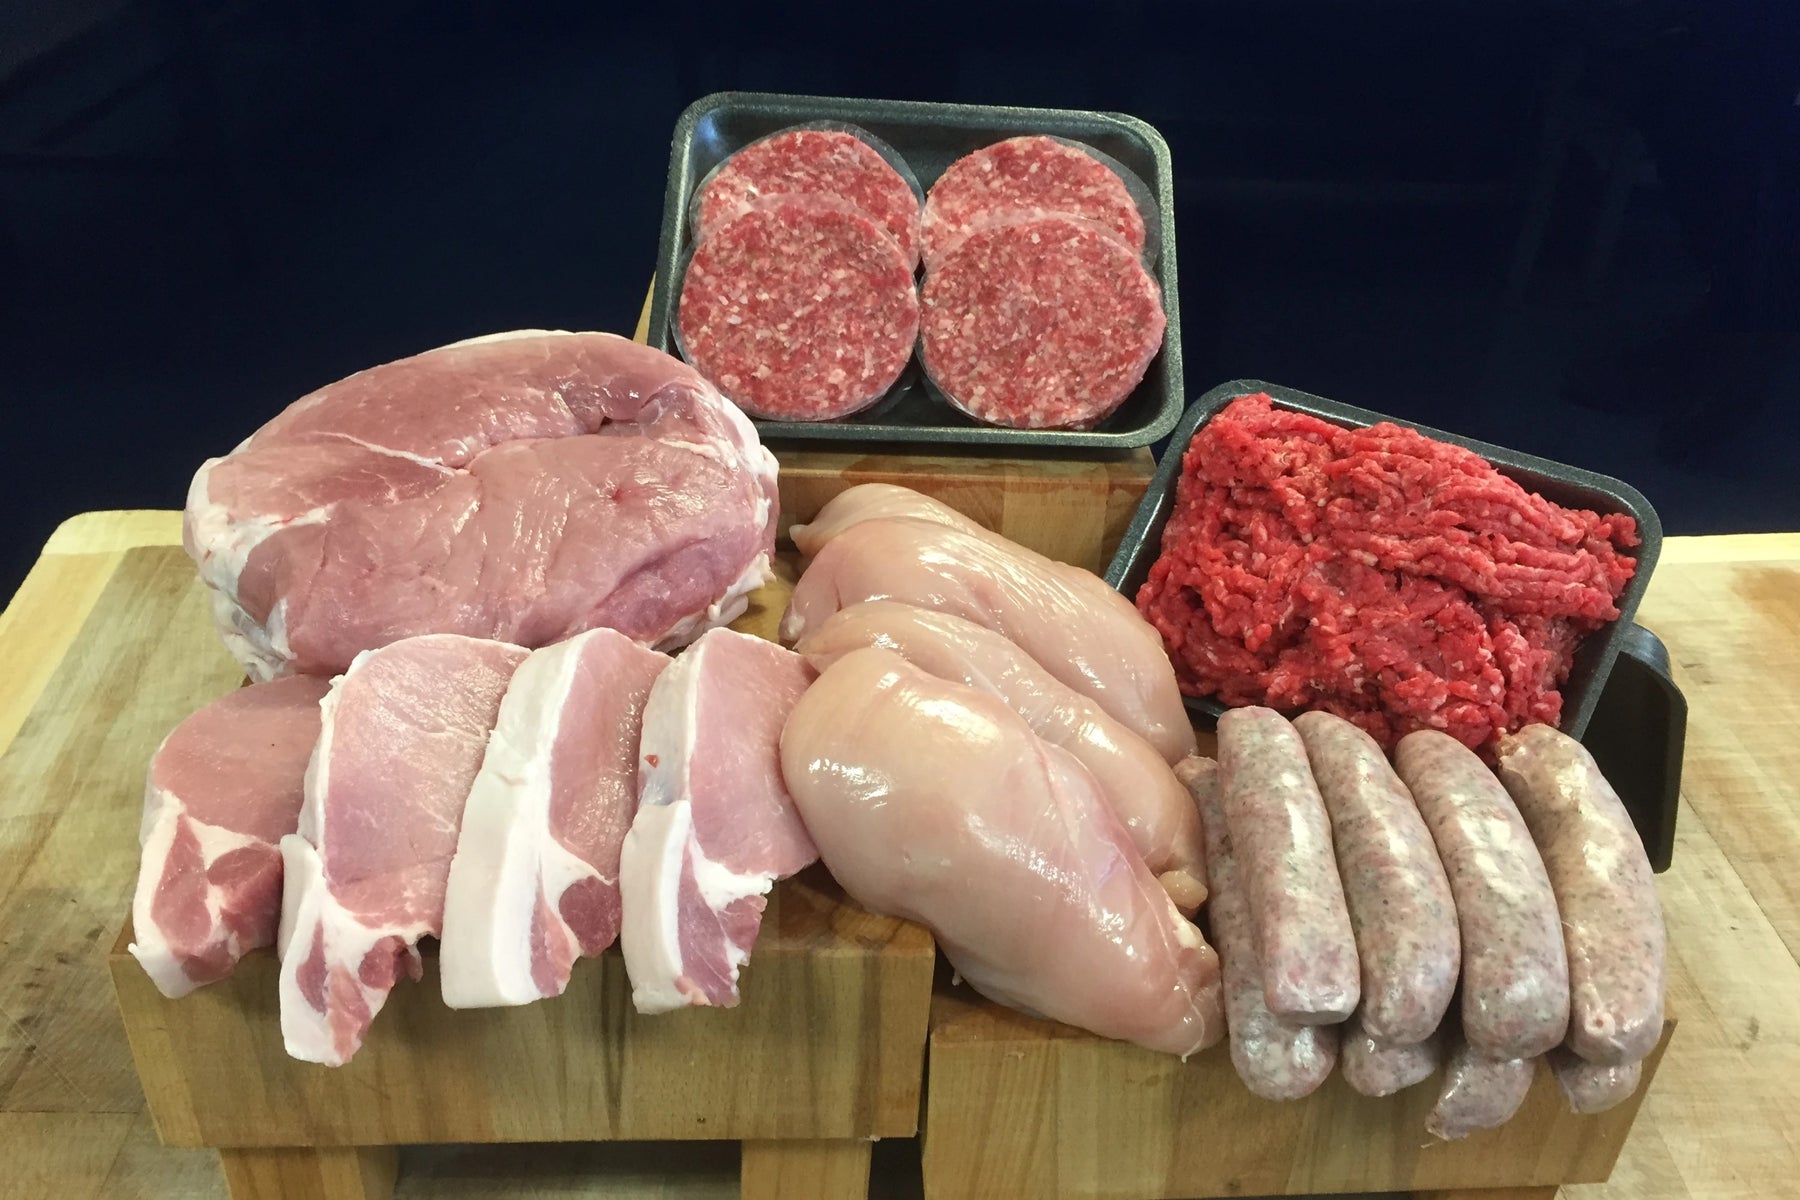 fresh meat delivery singapore, frozen beef, chicken and pork supplier